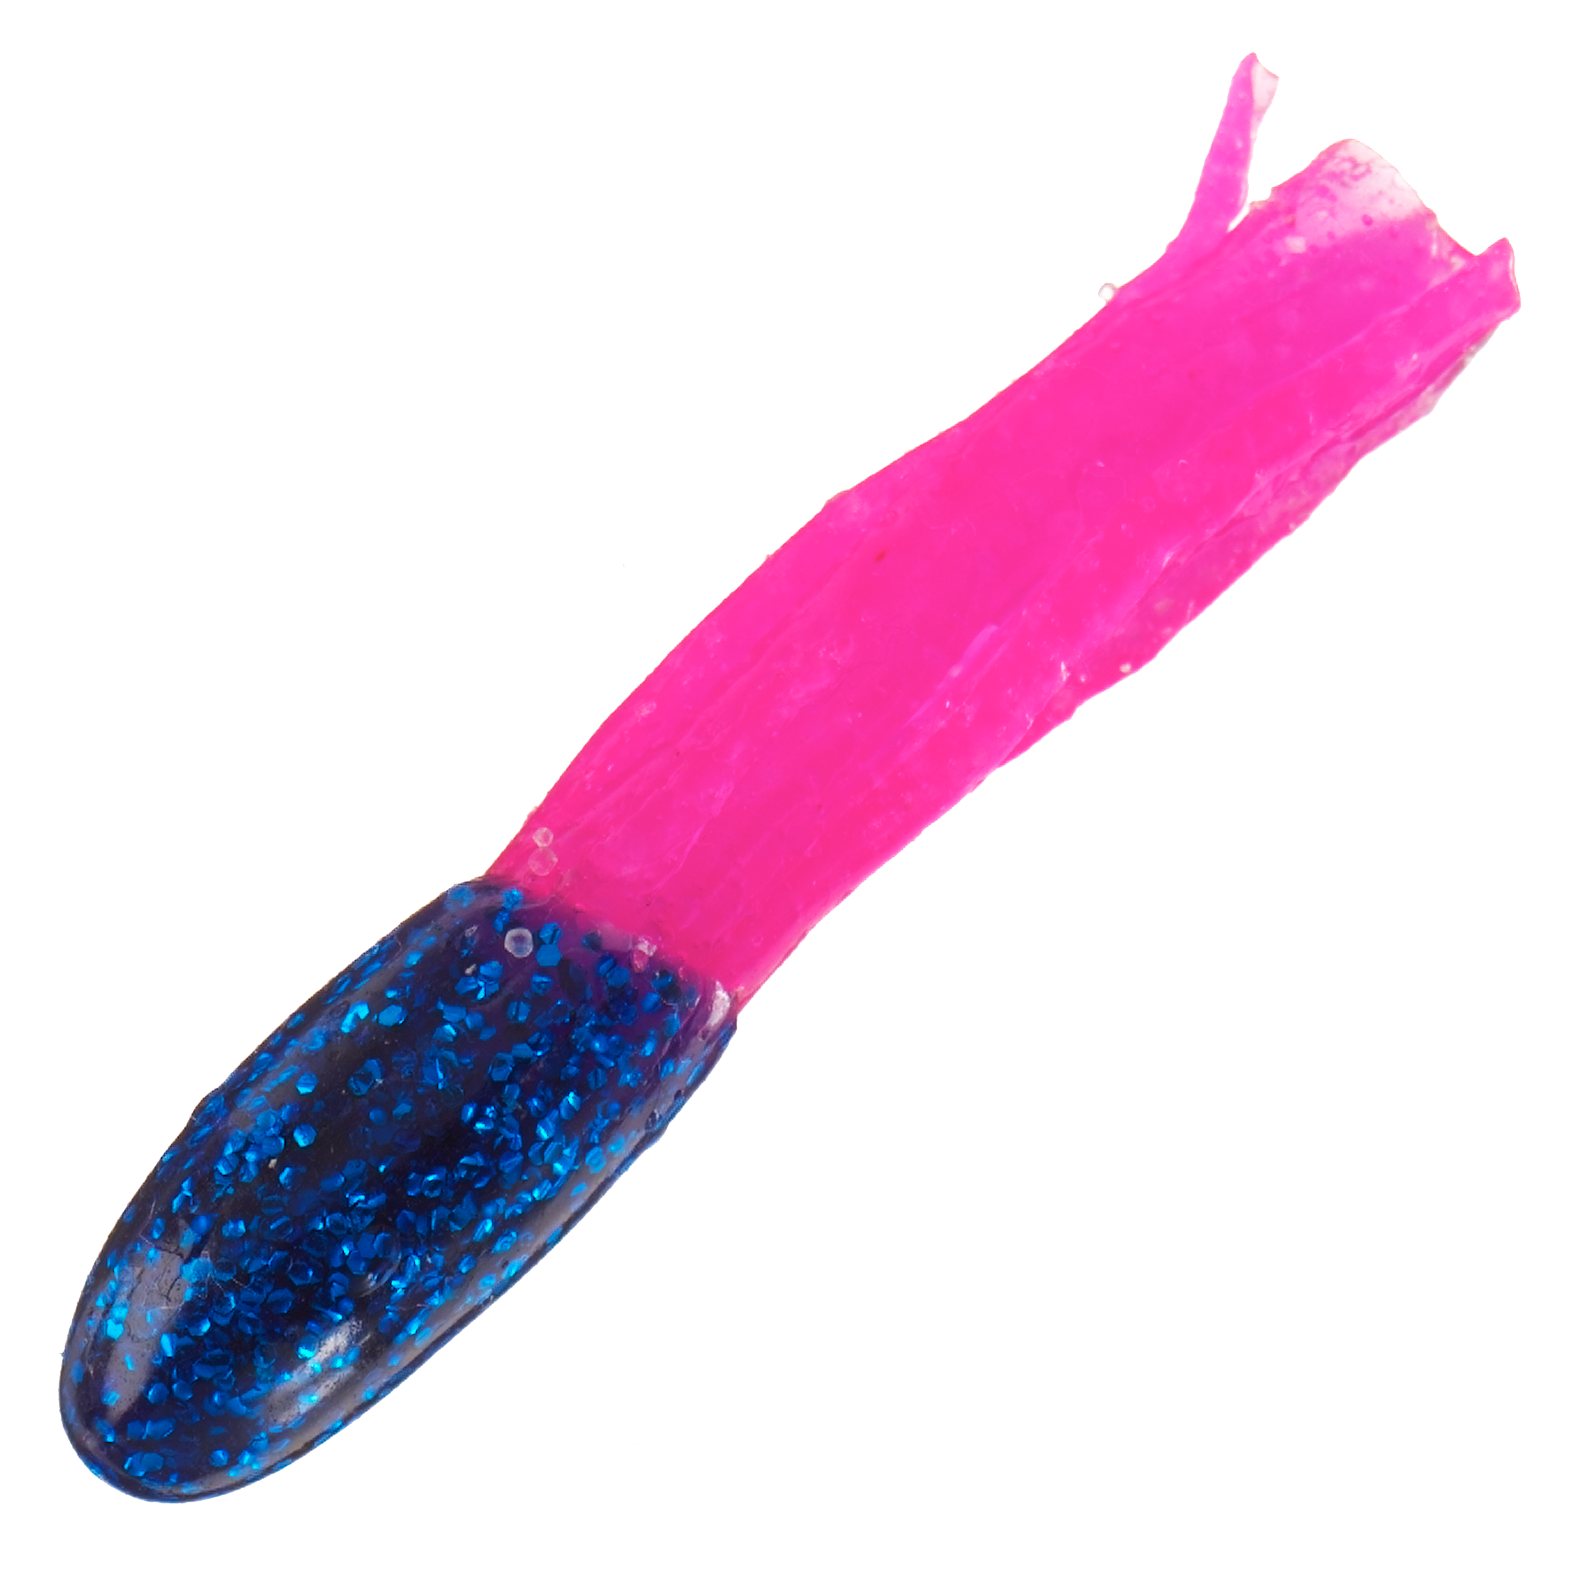 Bass Pro Shops Sparkle Squirts - 1-1/2"" - 15 pack - Electric Blue/Pink